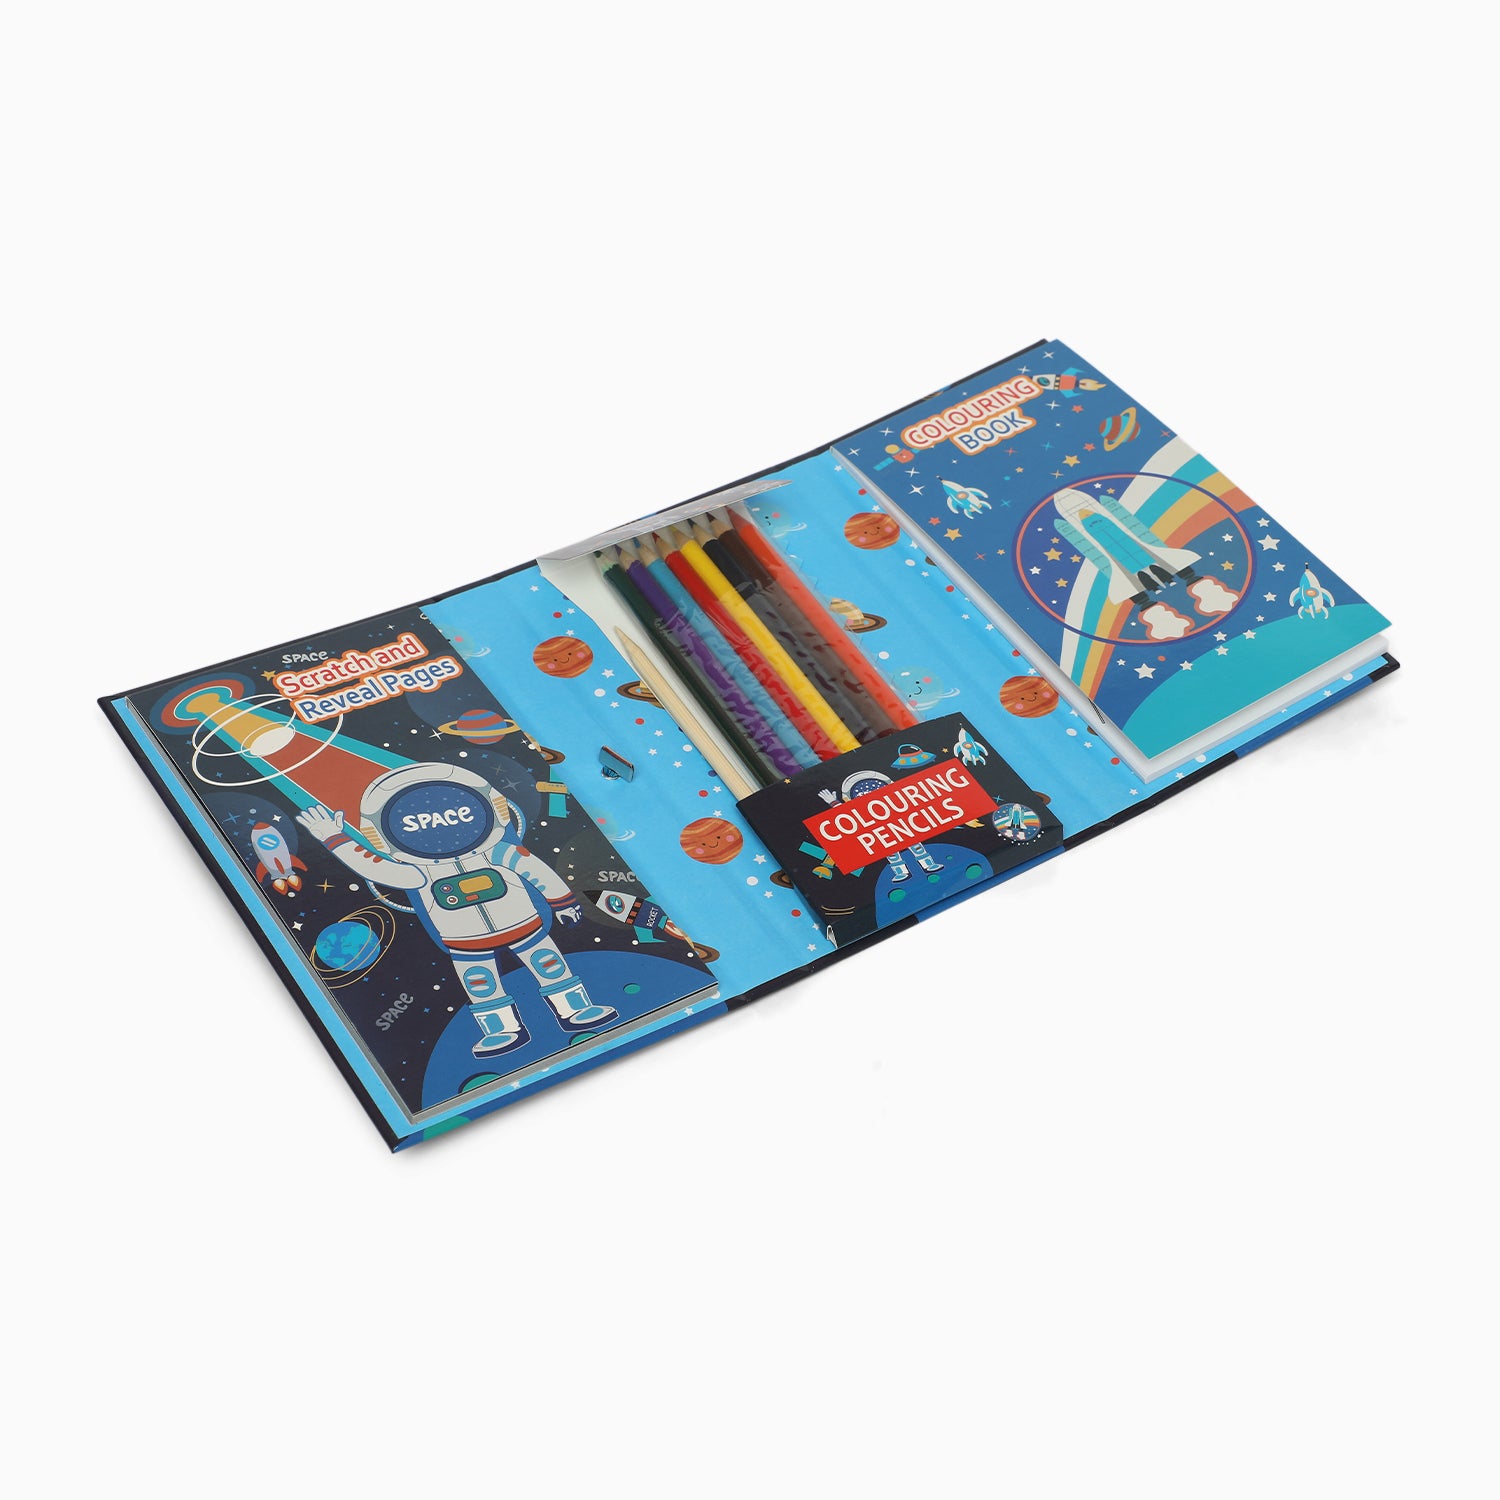 space 3 fold colouring book with scratch notes,colouring pencil and stencil